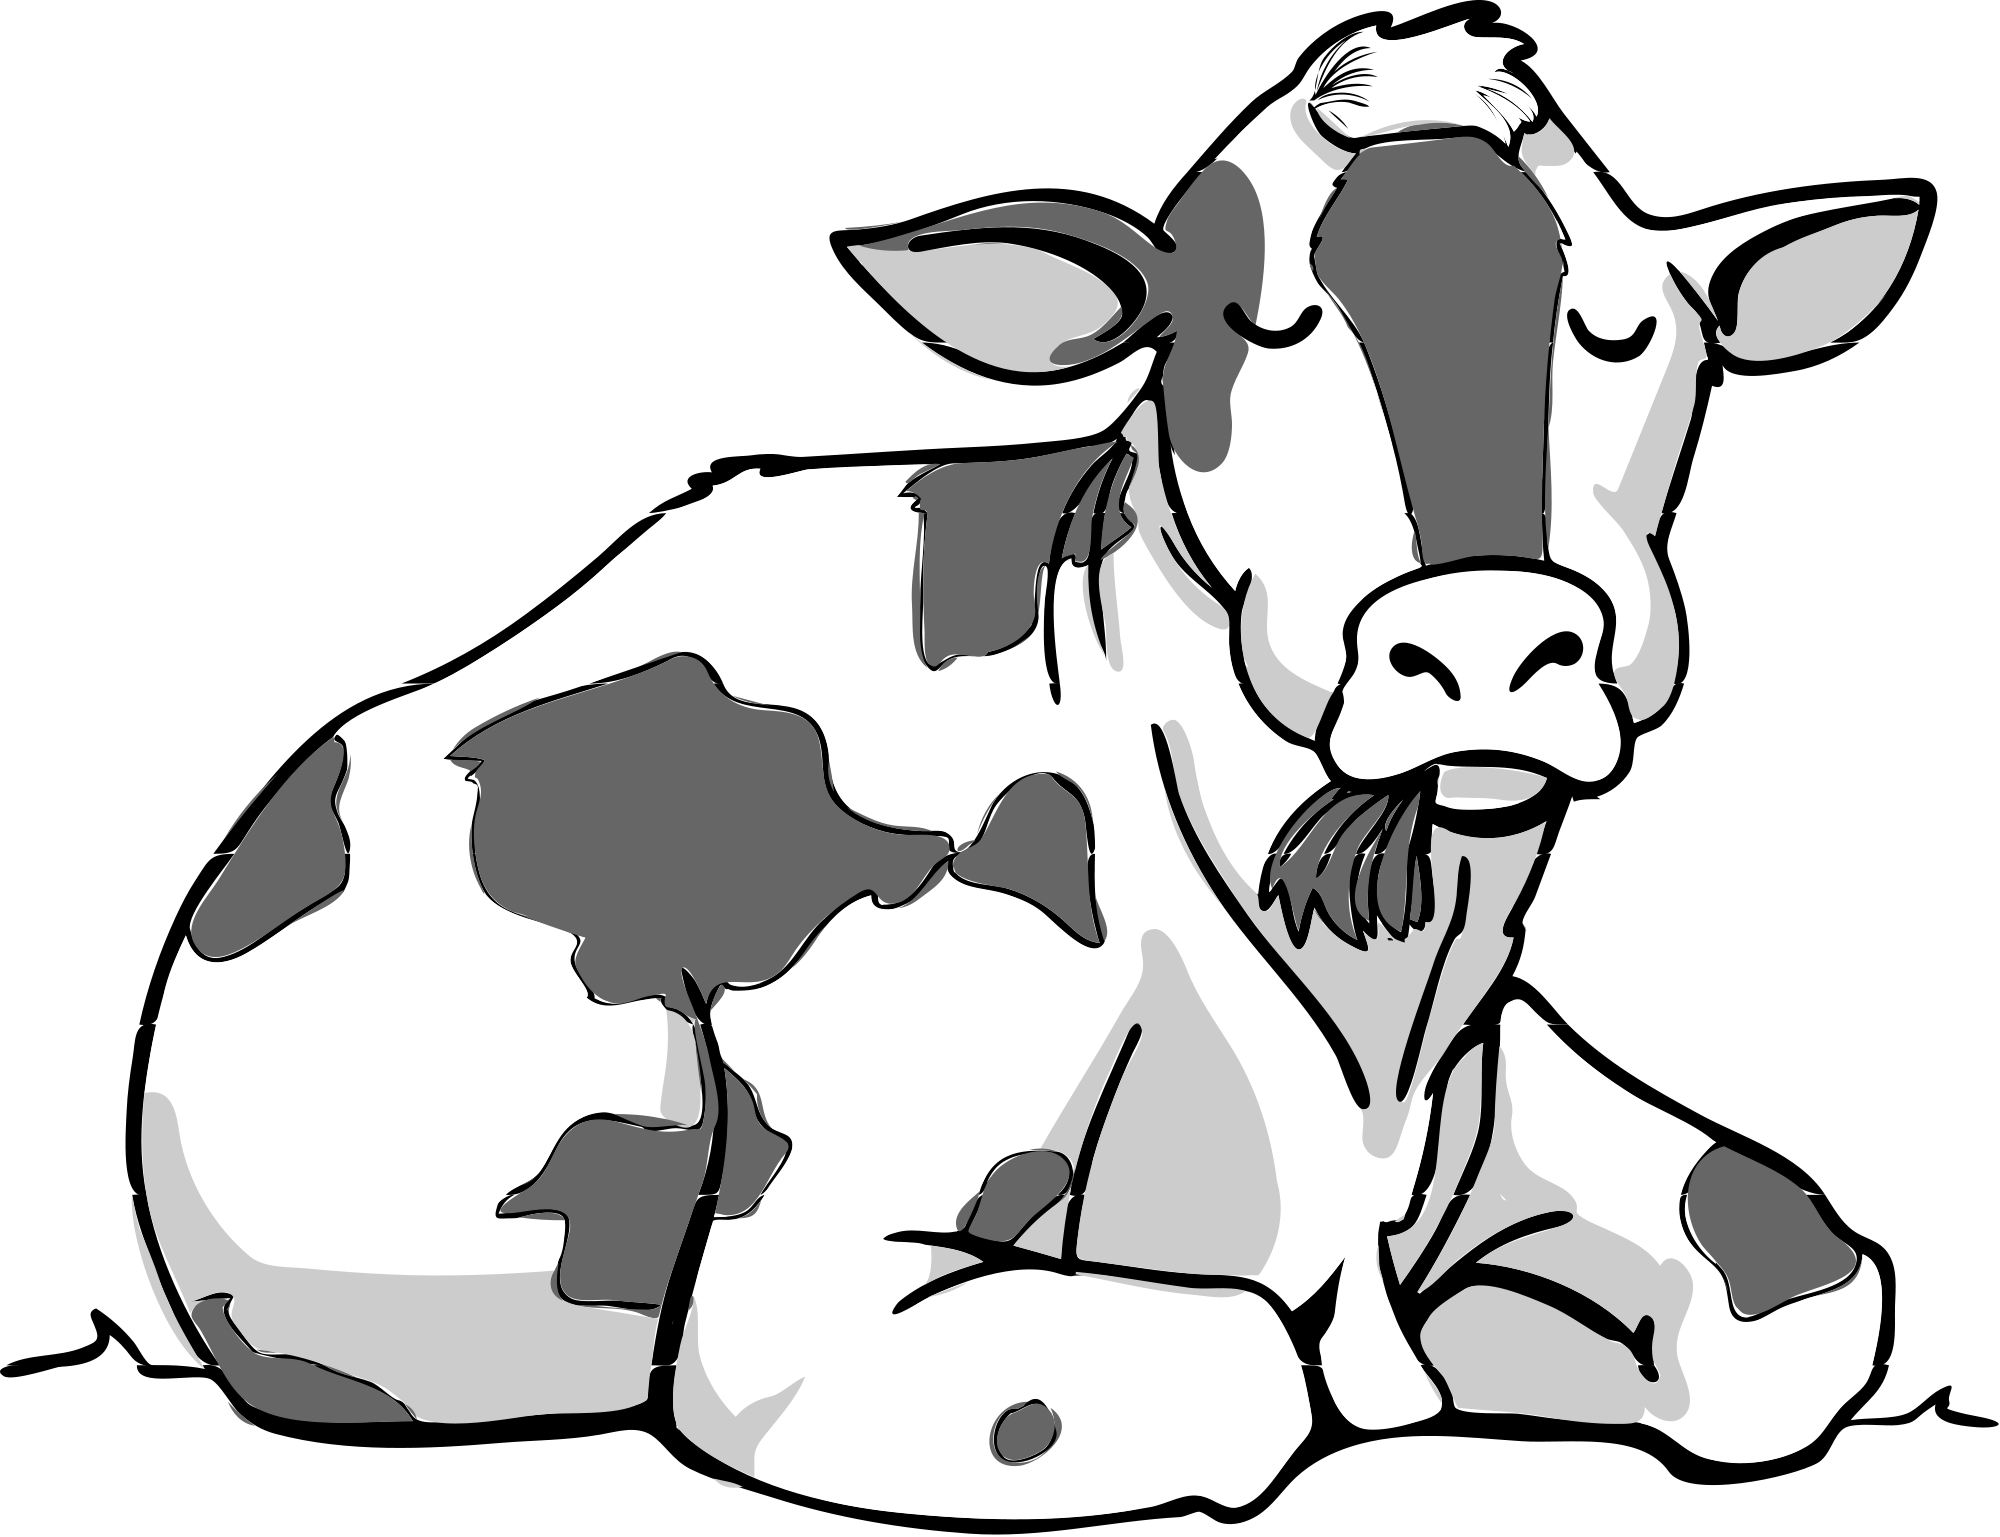 Clipart sleeping black and white. File cow bw svg